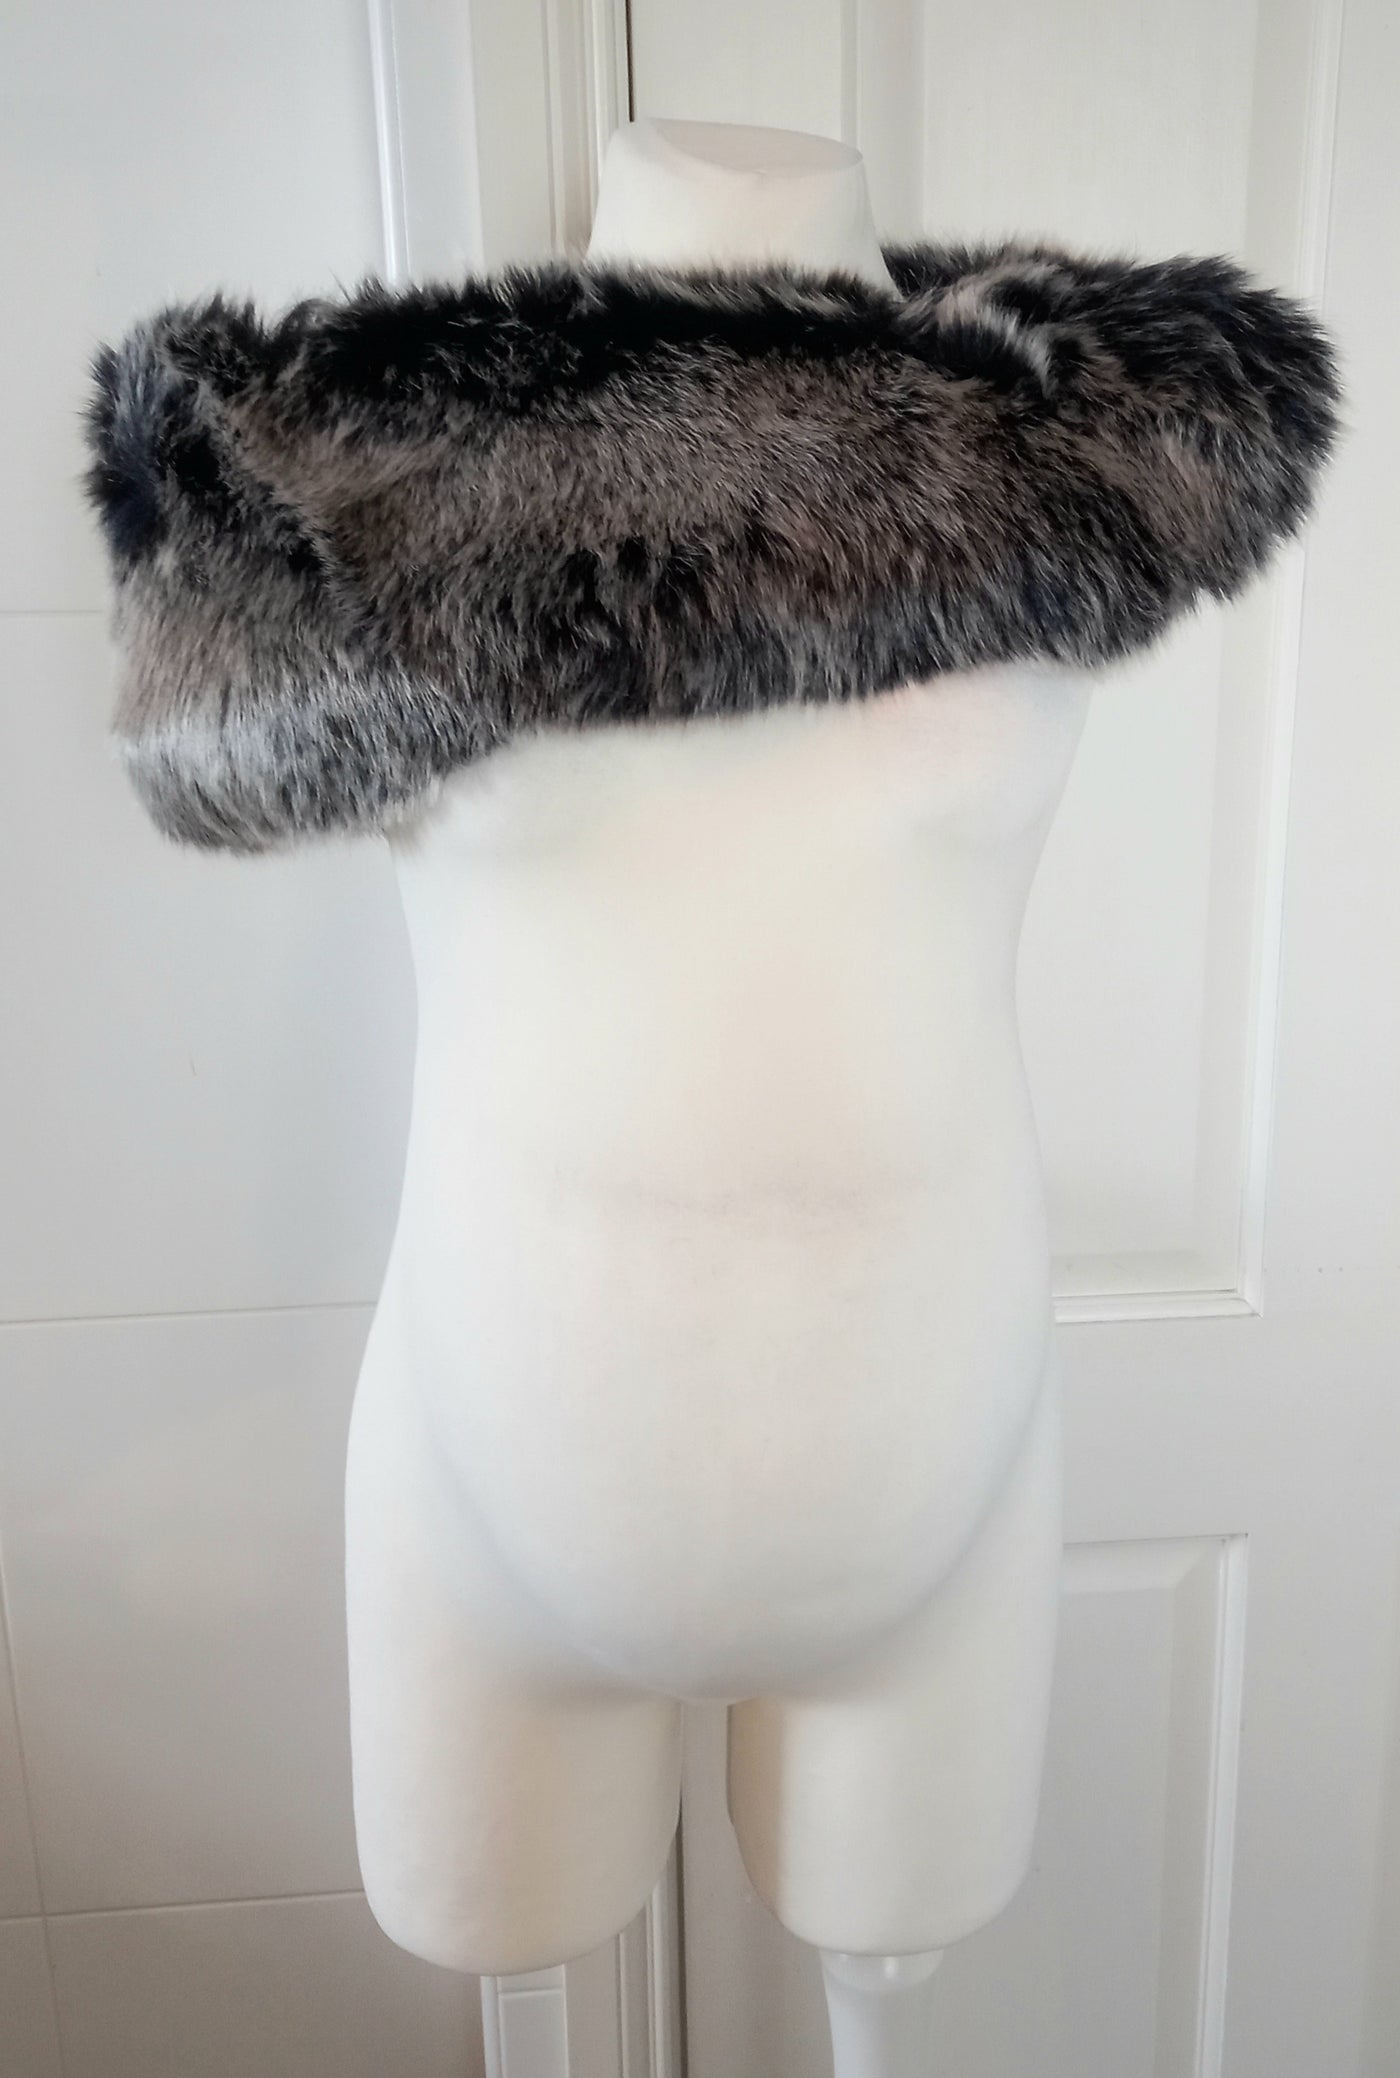 Black & Grey Faux Fur Shrug with Fastening Hook - One Size